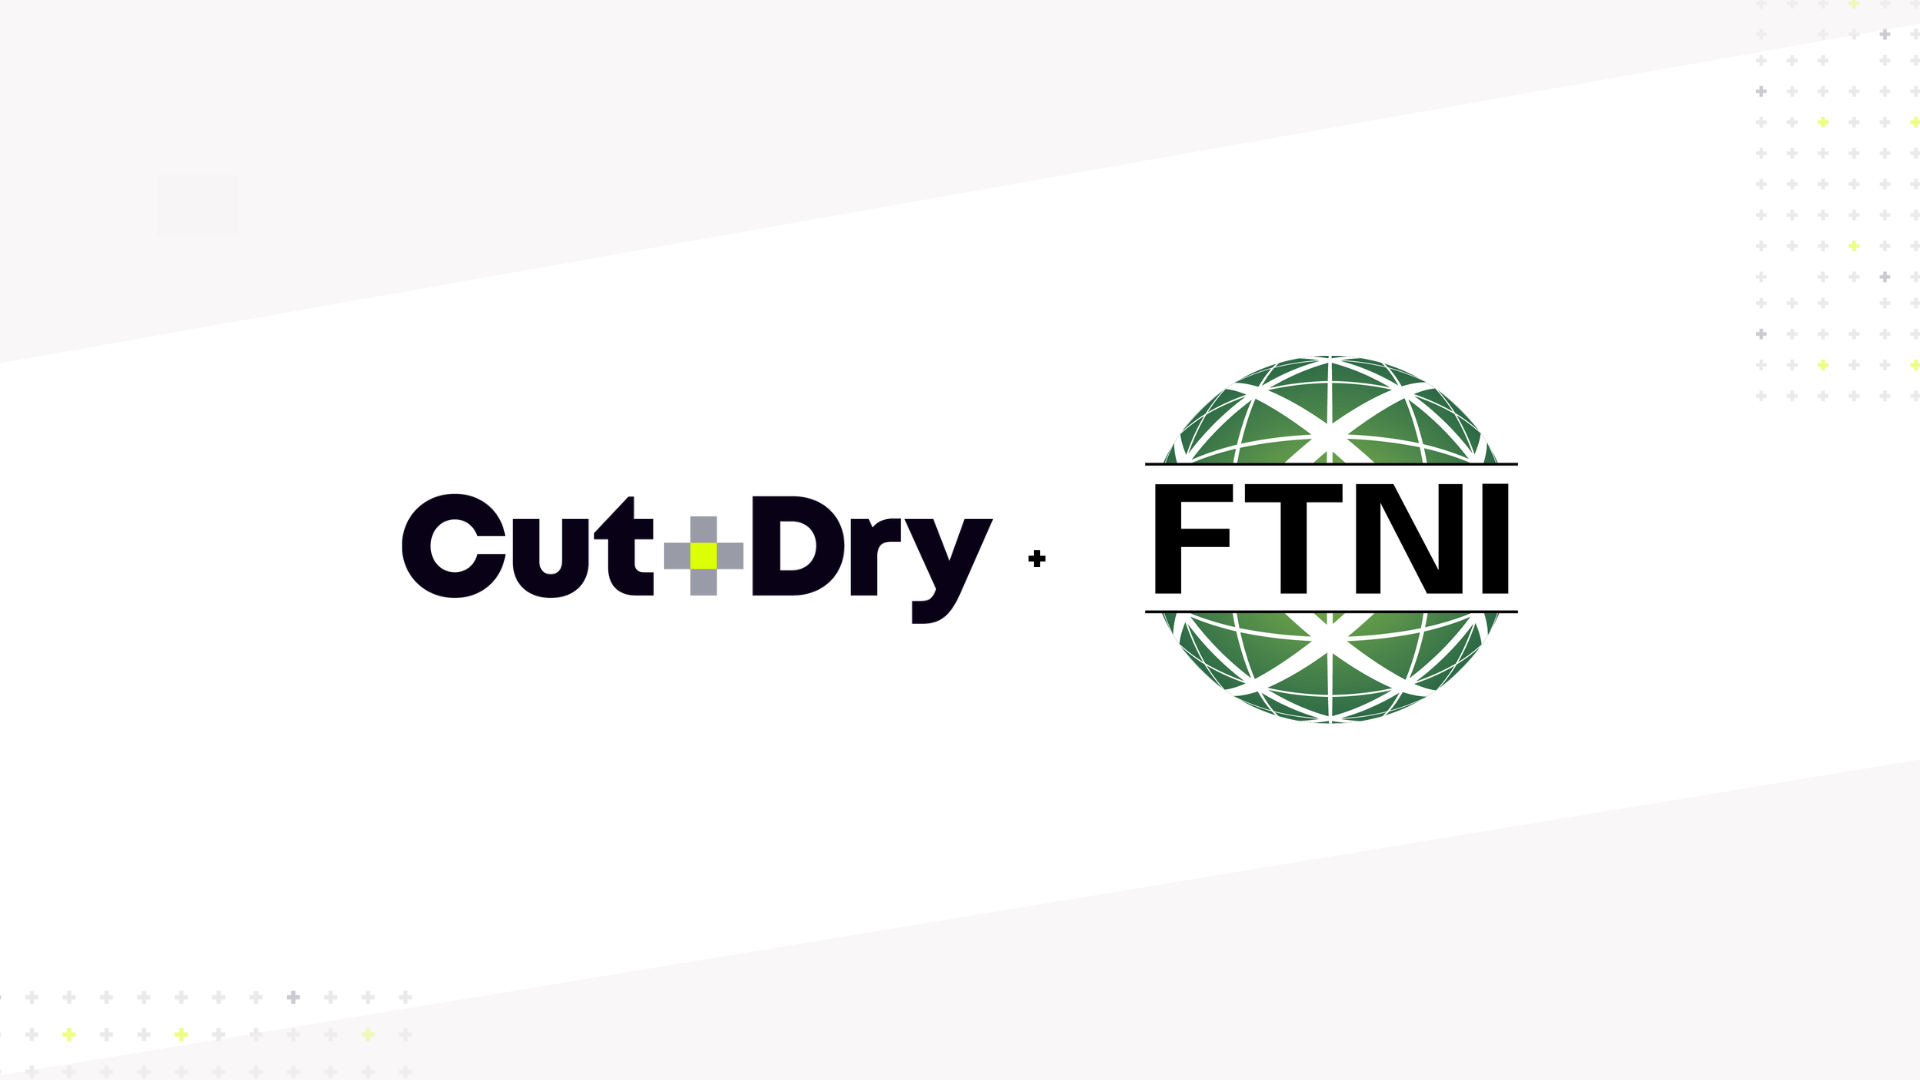 Cut+Dry and Financial Transmission Network, Inc. (FTNI) Announce New Strategic Partnership to Revolutionize A/R and E-Commerce Operations for Foodservice Distributors